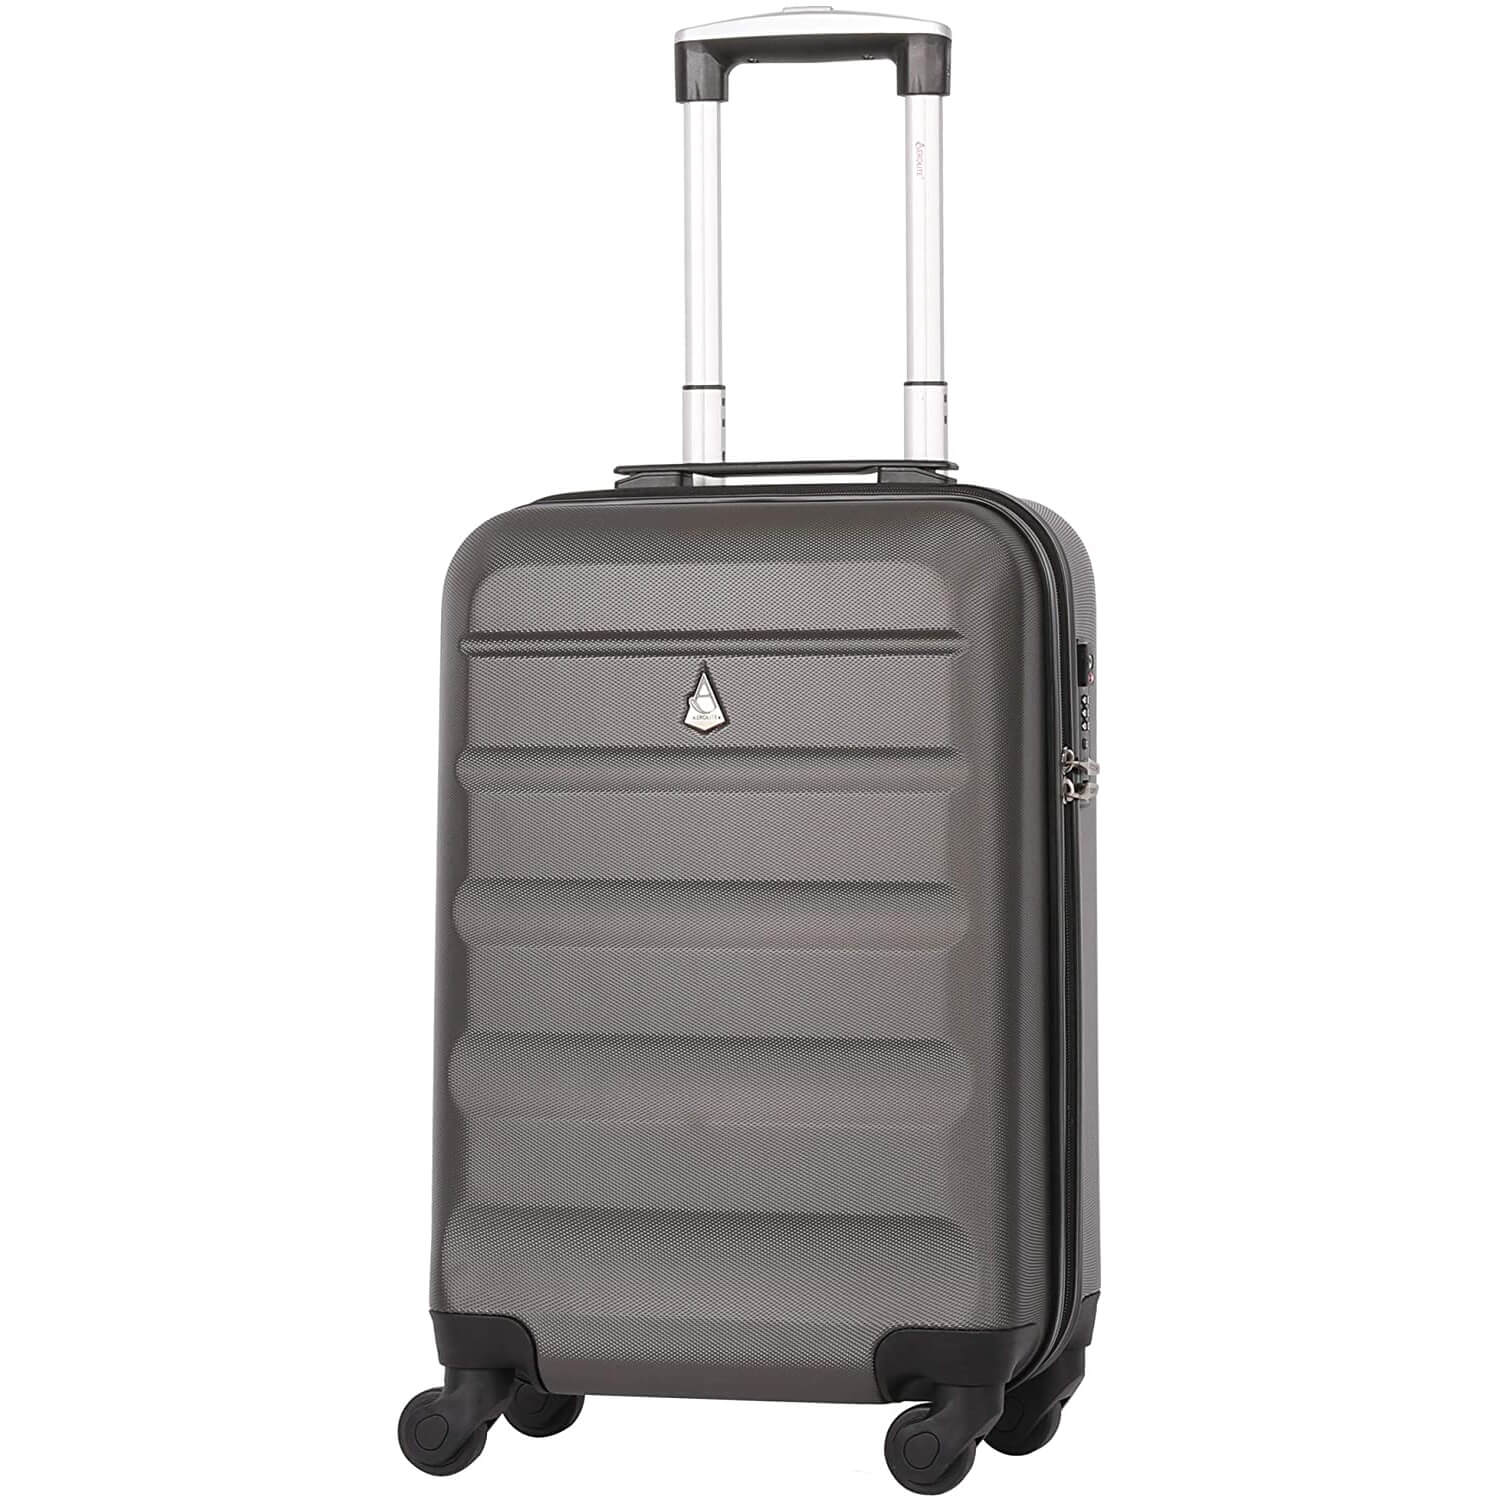 Aerolite 3 Piece Lightweight 4 Wheel ABS Hard Shell Luggage Suitcase Set with Built in TSA Combination Lock, 2 x 21" Cabin + 1x Large 29", Charcoal